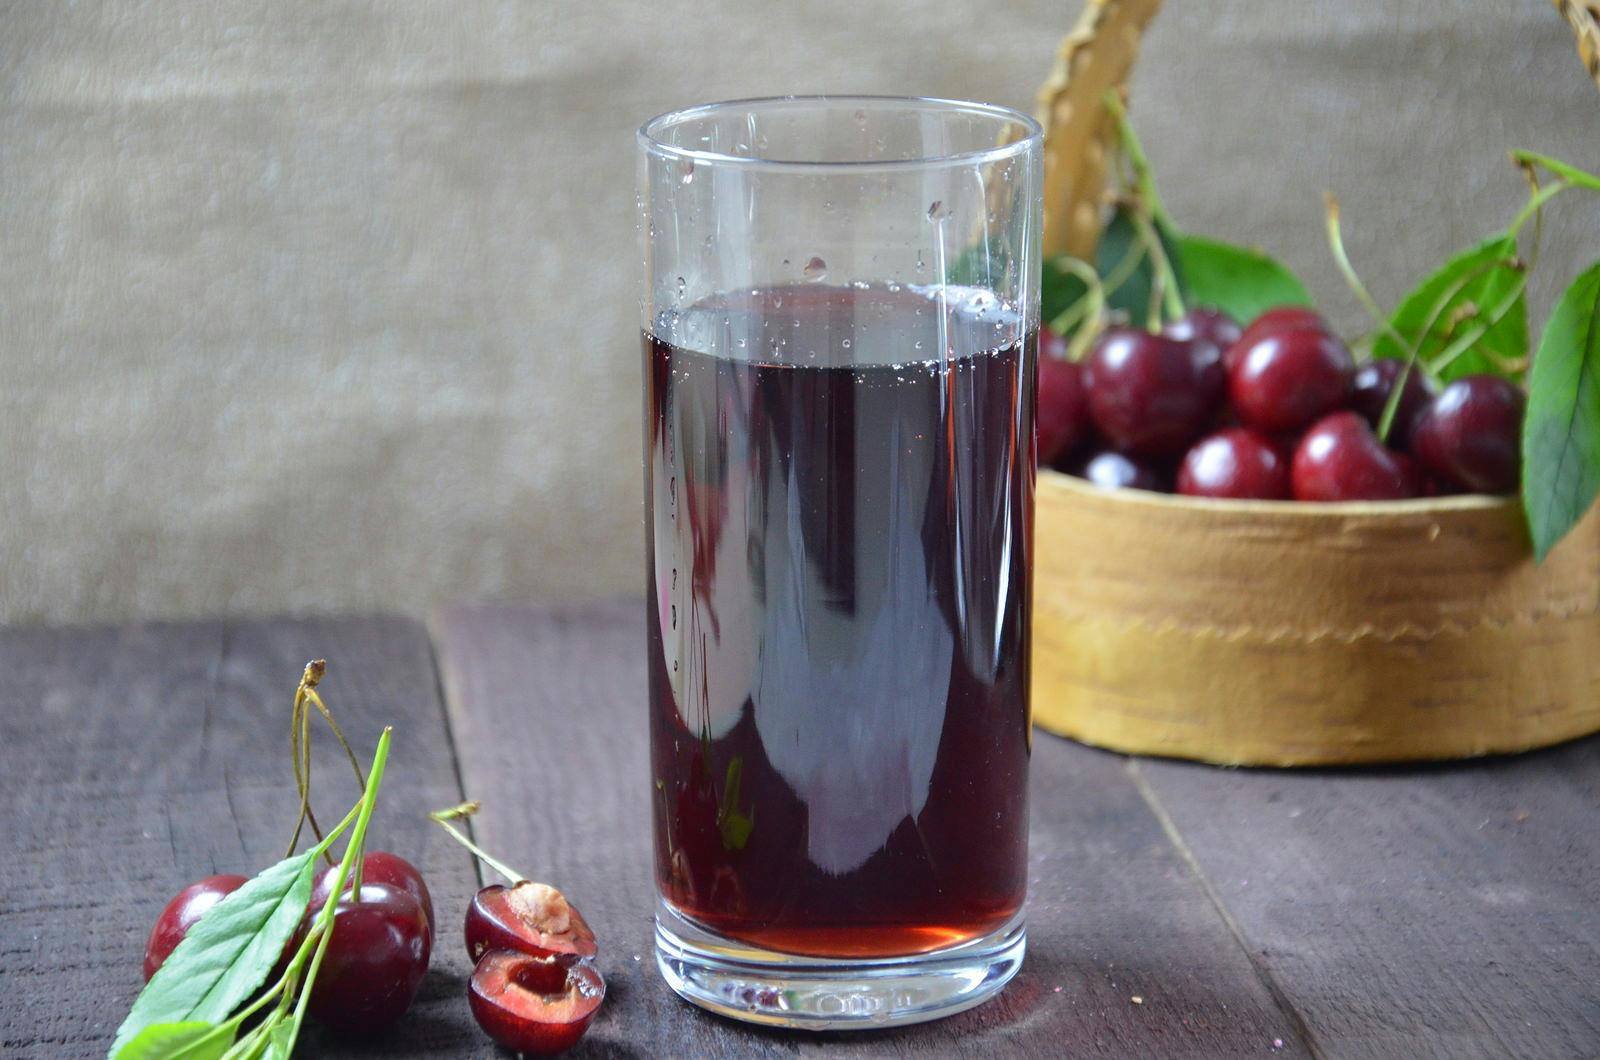 cold cherry juice in a glass and pitcher on wooden table with ripe berries in wicker basket